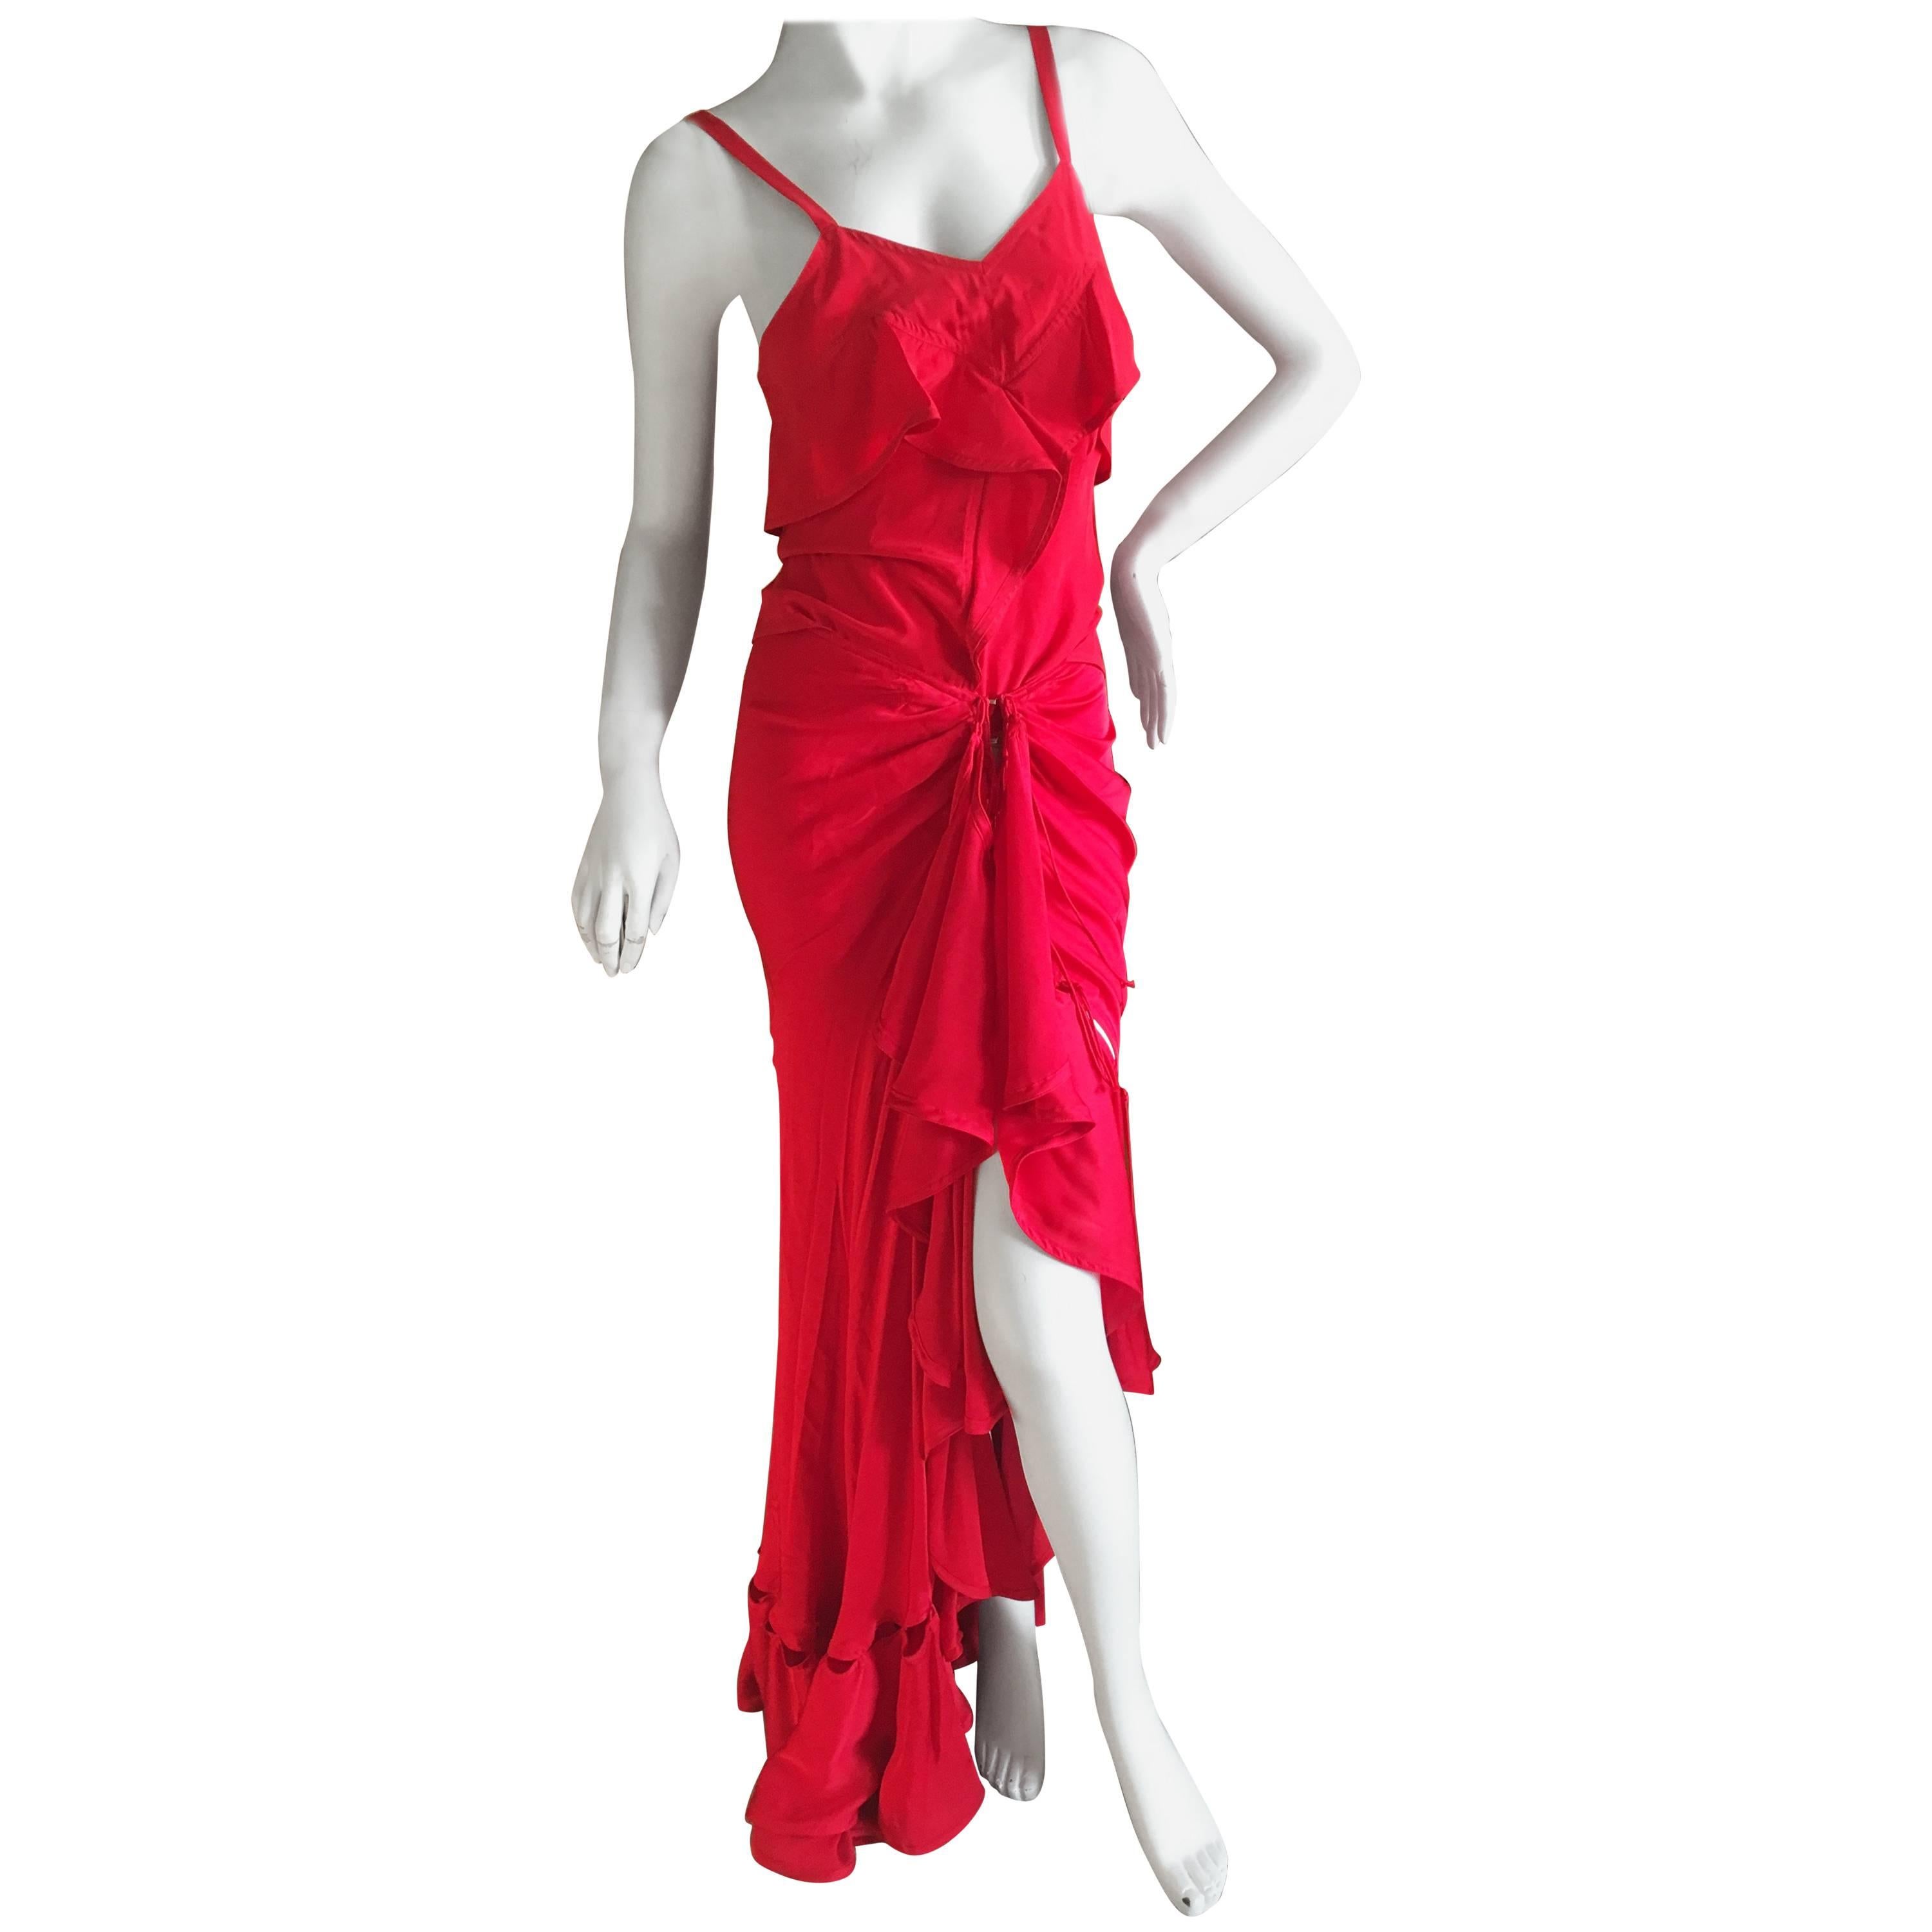 Yves Saint Laurent by Tom Ford Fall 2003 Red Two Piece Evening Dress